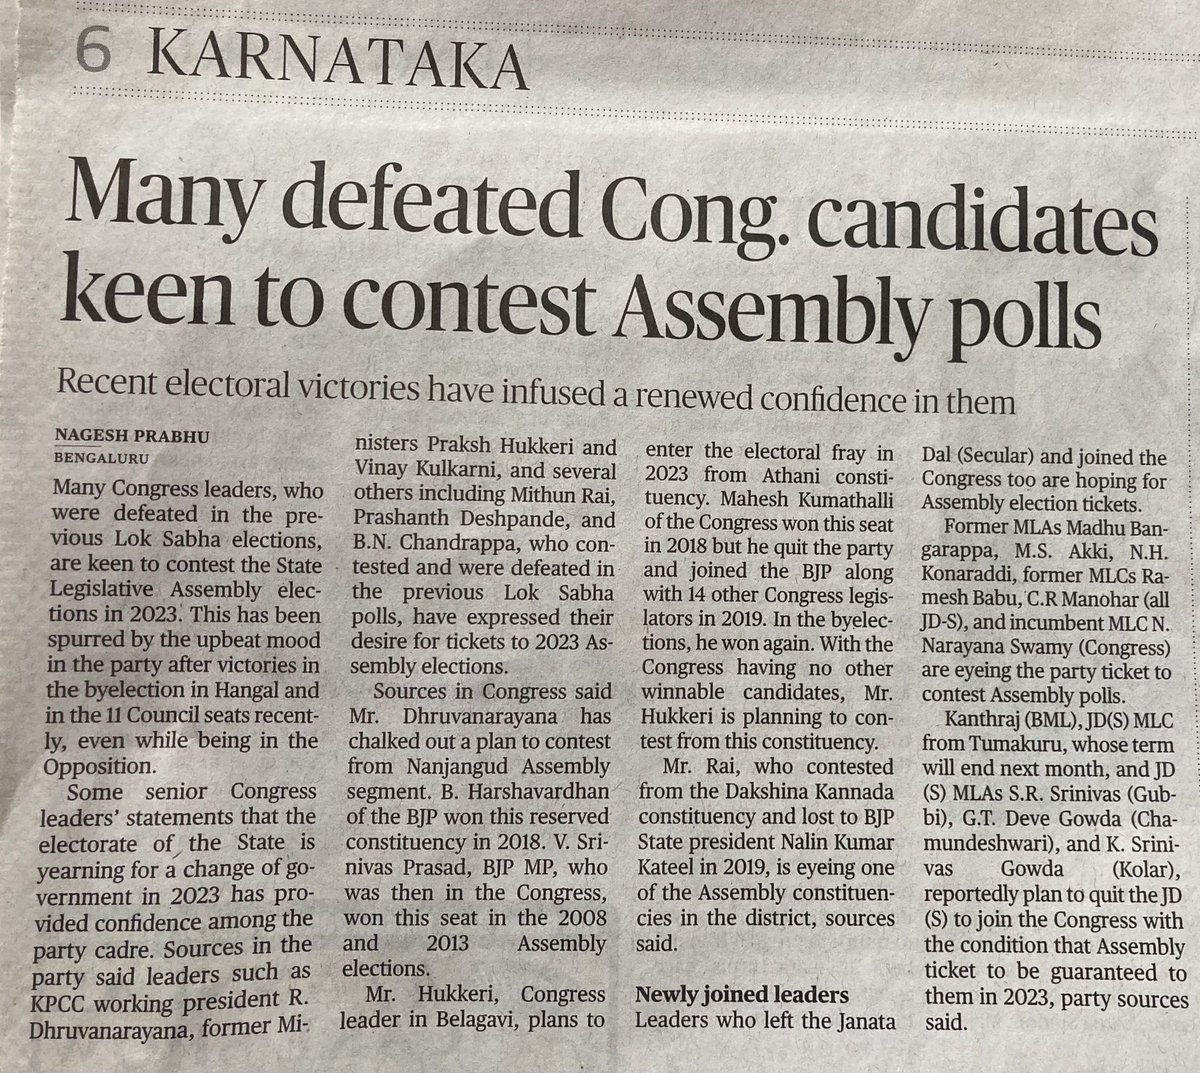 Congress leaders ready to contest assembly polls but not Lok Sabha 
#inc 
#congress 
#karntakacongress
#congressparty 
#rahulgandhi 
#loksabha 
#assemblypoll